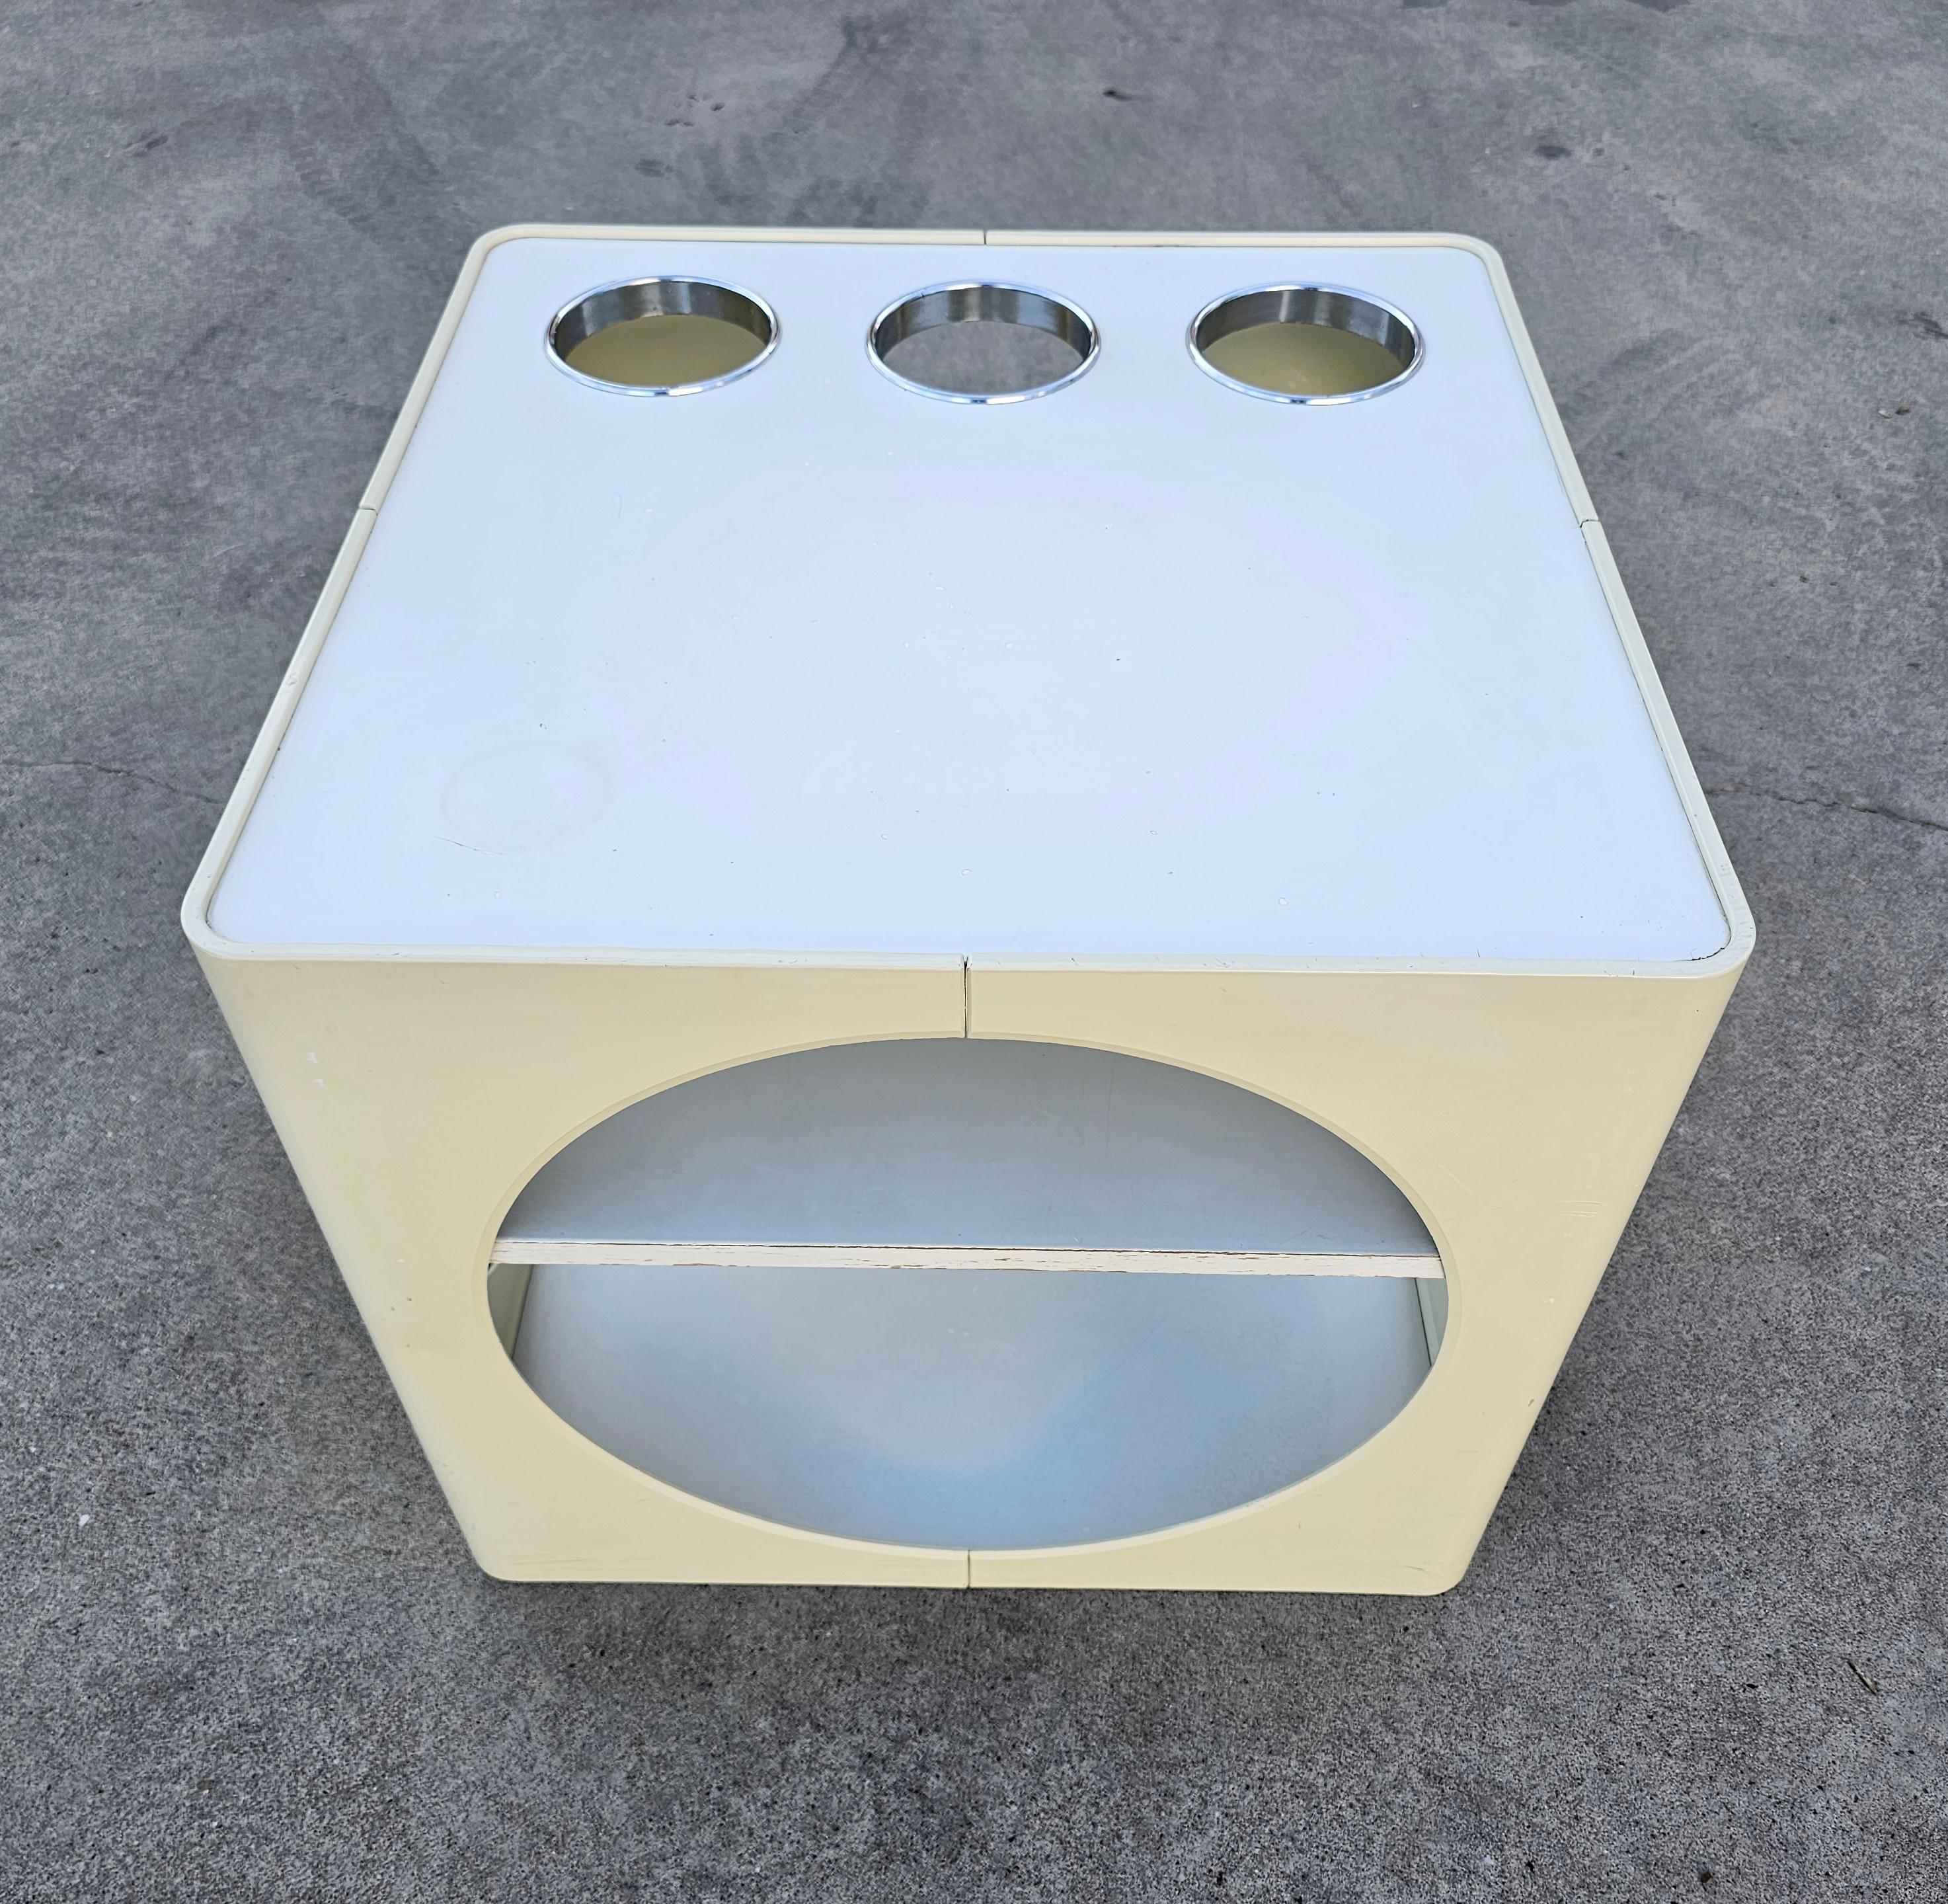 Space Age Cube Bar or Side Table in Off-White, West Germany 1970s For Sale 2